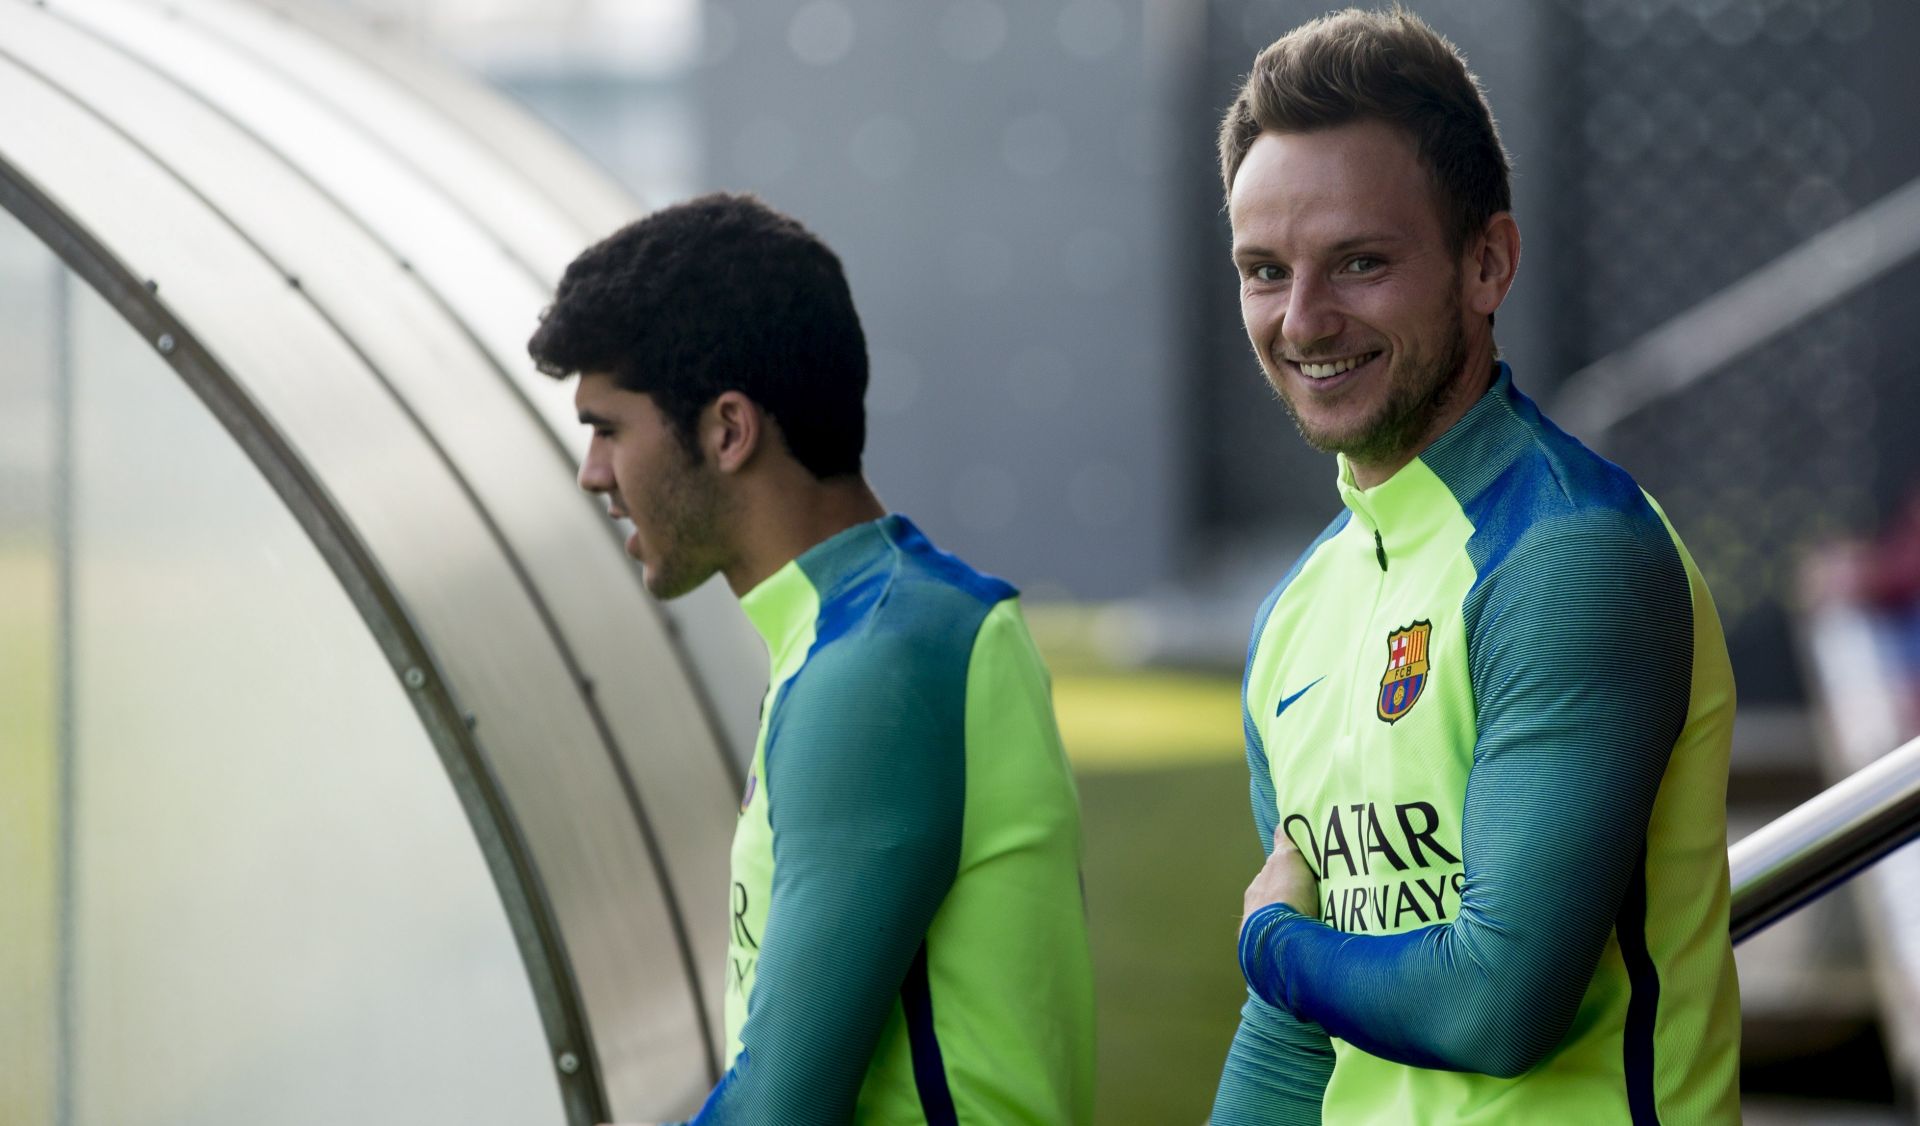 epa05801458 FC Barcelona's Croatian midfielder Ivan Rakitic (R) arrives for a training session at the team's Joan Gamper sport facilities in Barcelona, Spain, 18 February 2017. FC Barcelona will face CD Leganes in a Spanish Primera Division League soccer match on 19 February.  EPA/Quique Garcia